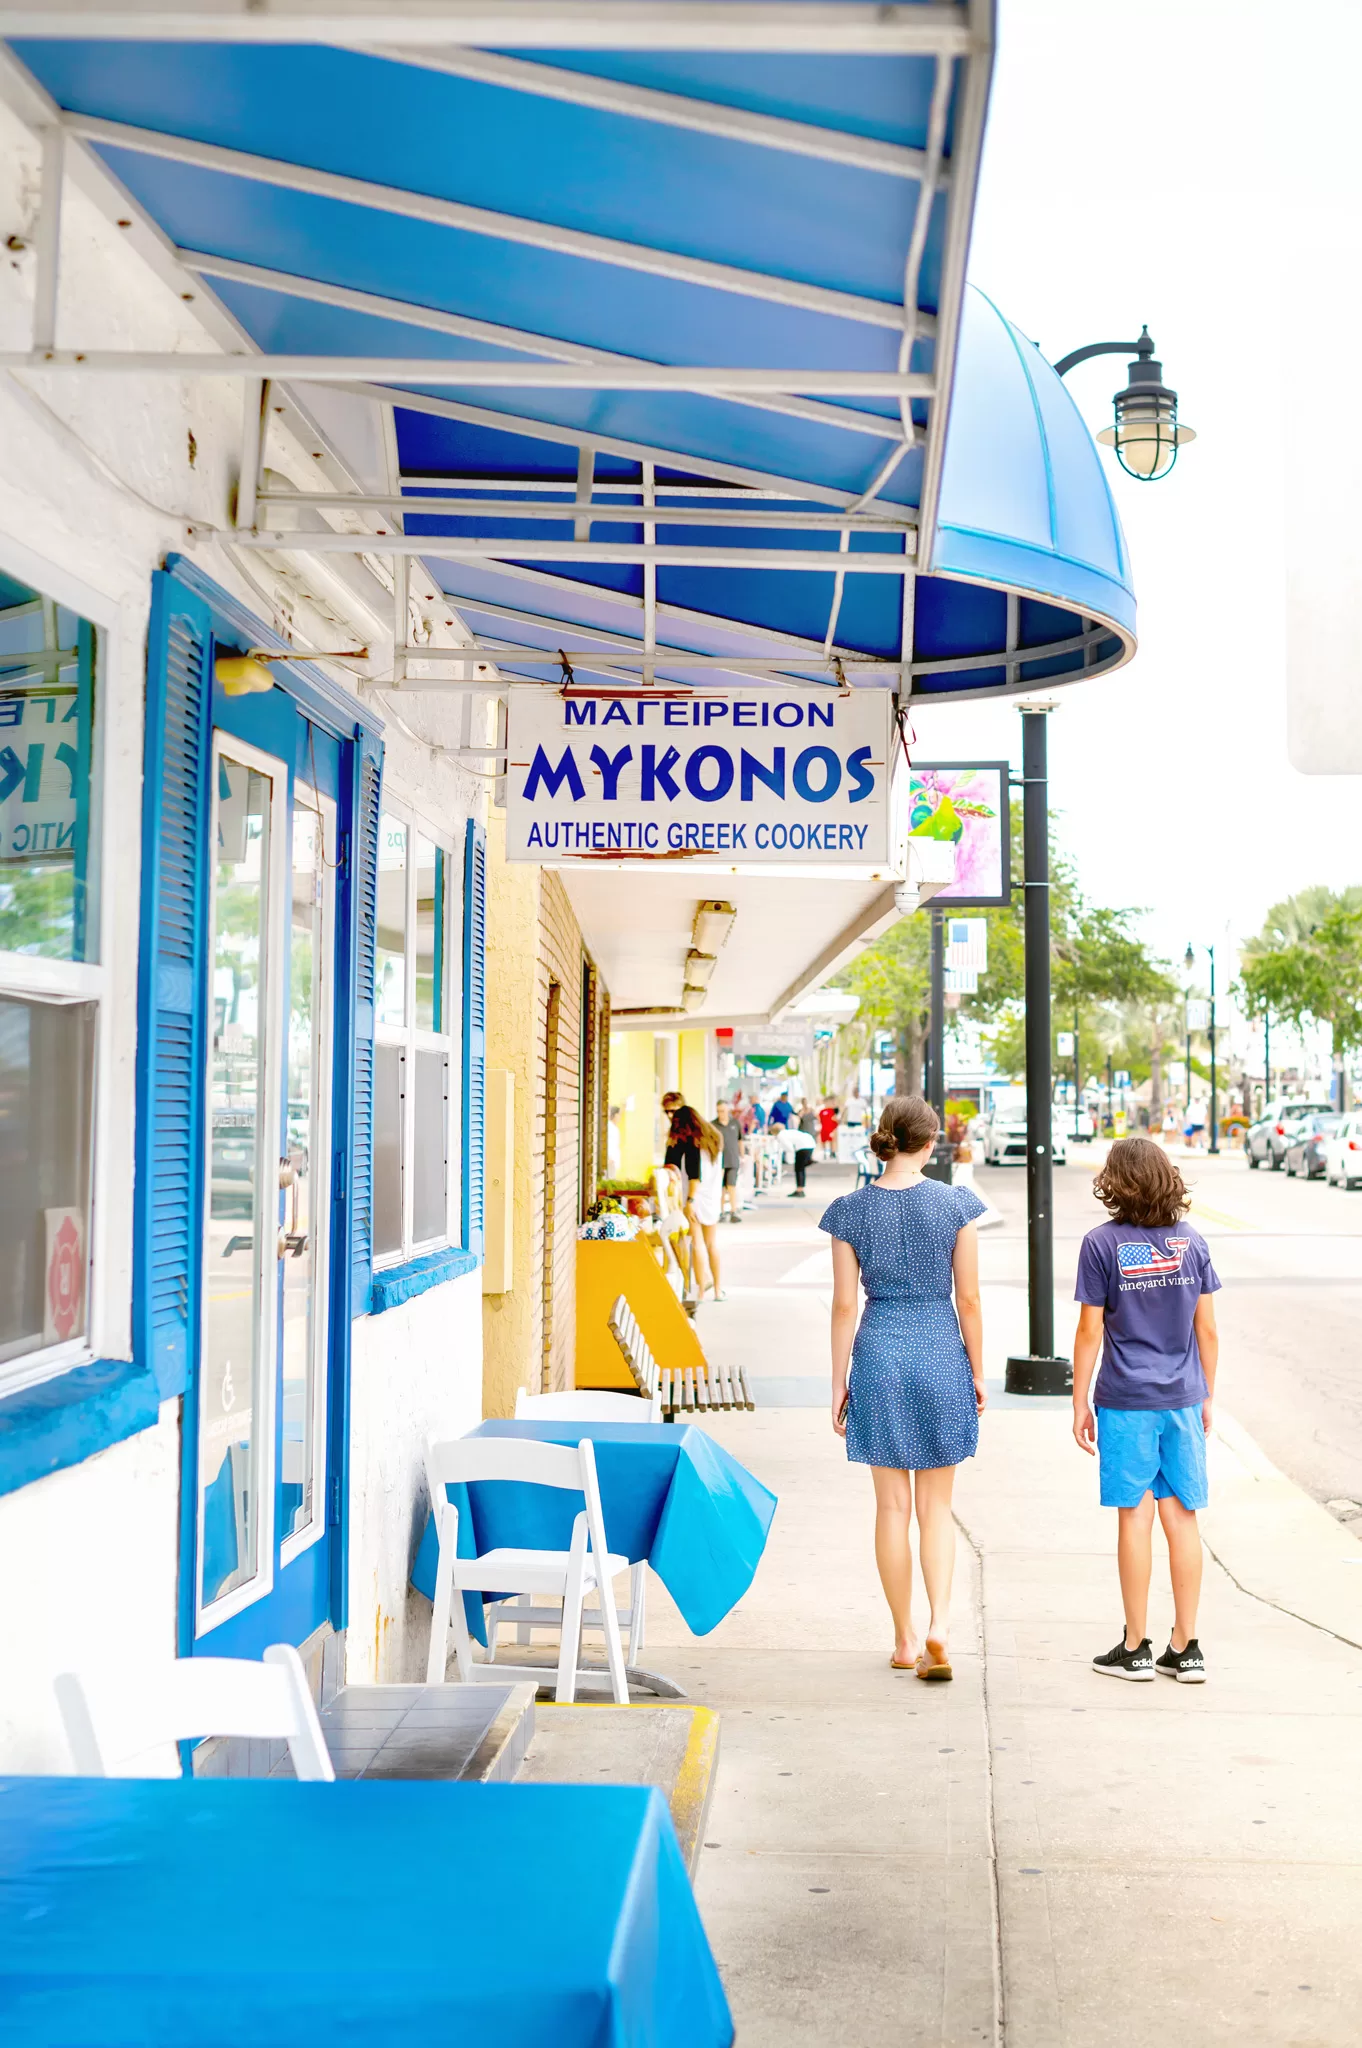 This image is for a blog post about Tarpon Springs Florida and shows two kids walking past the Mykonos restuarant in the greek part of town.